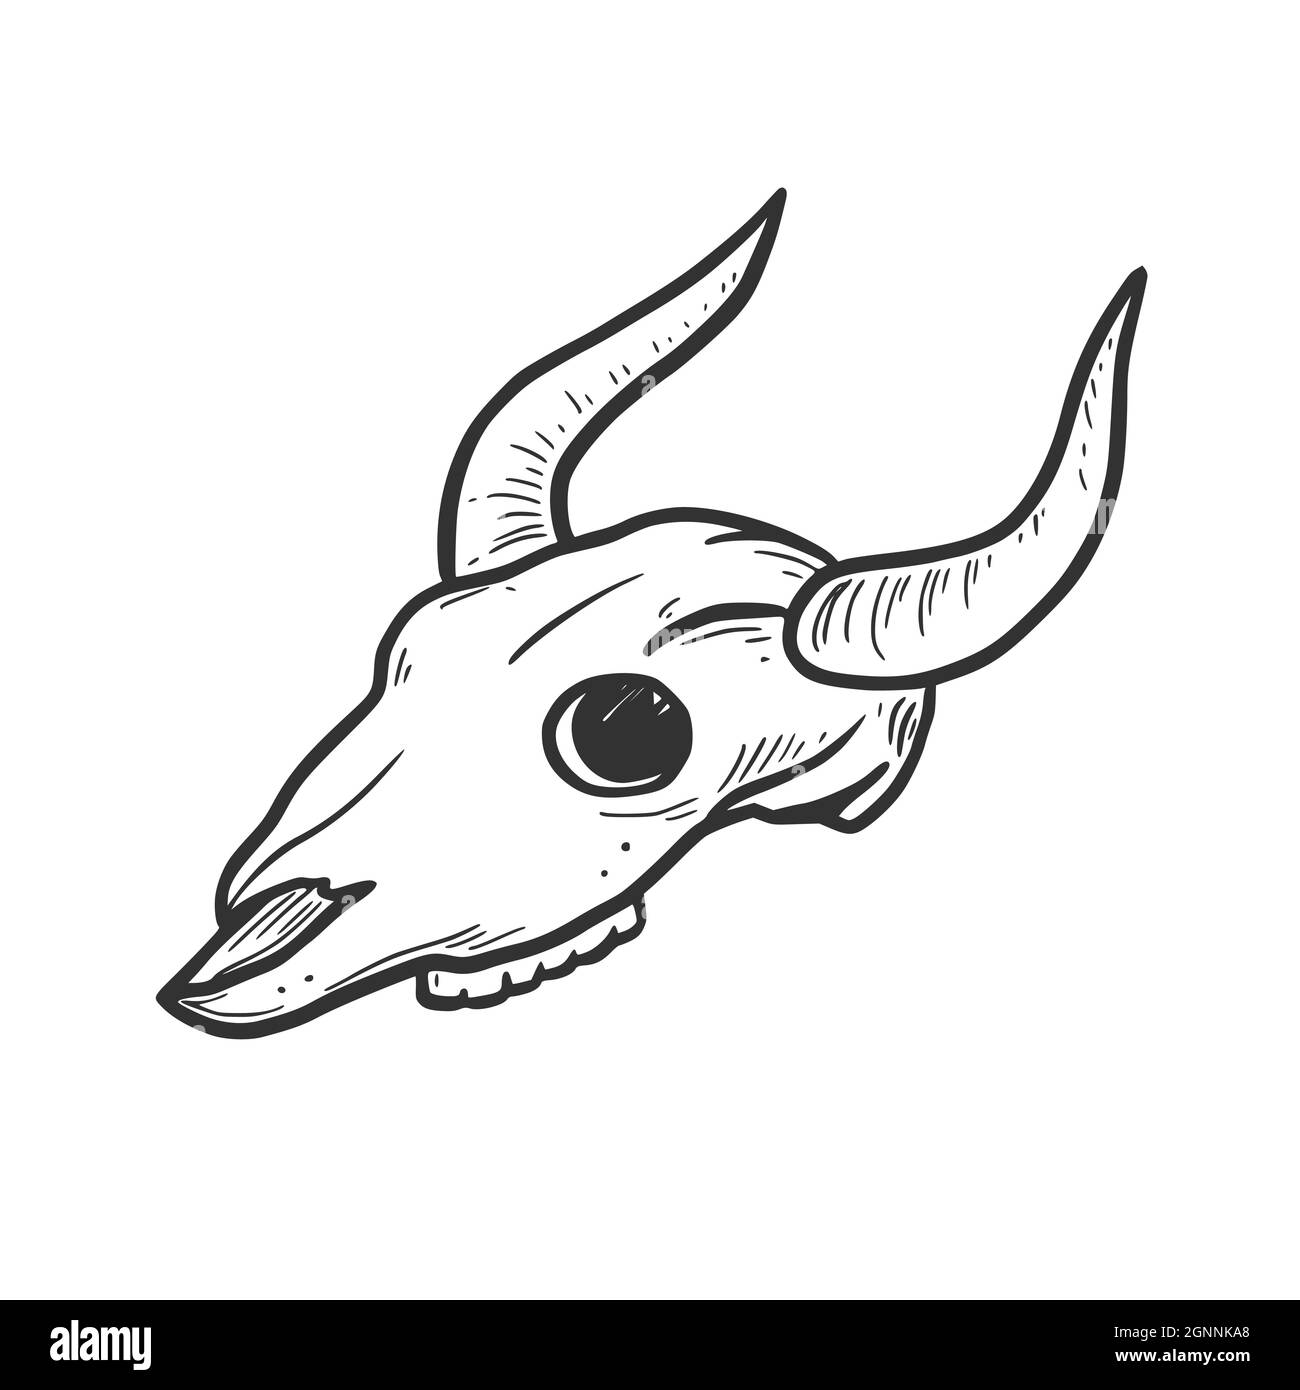 Hand drawn cow, bull skull element. Comic doodle sketch style. Cowboy, western concept icon. Isolated vector illustration. Stock Vector